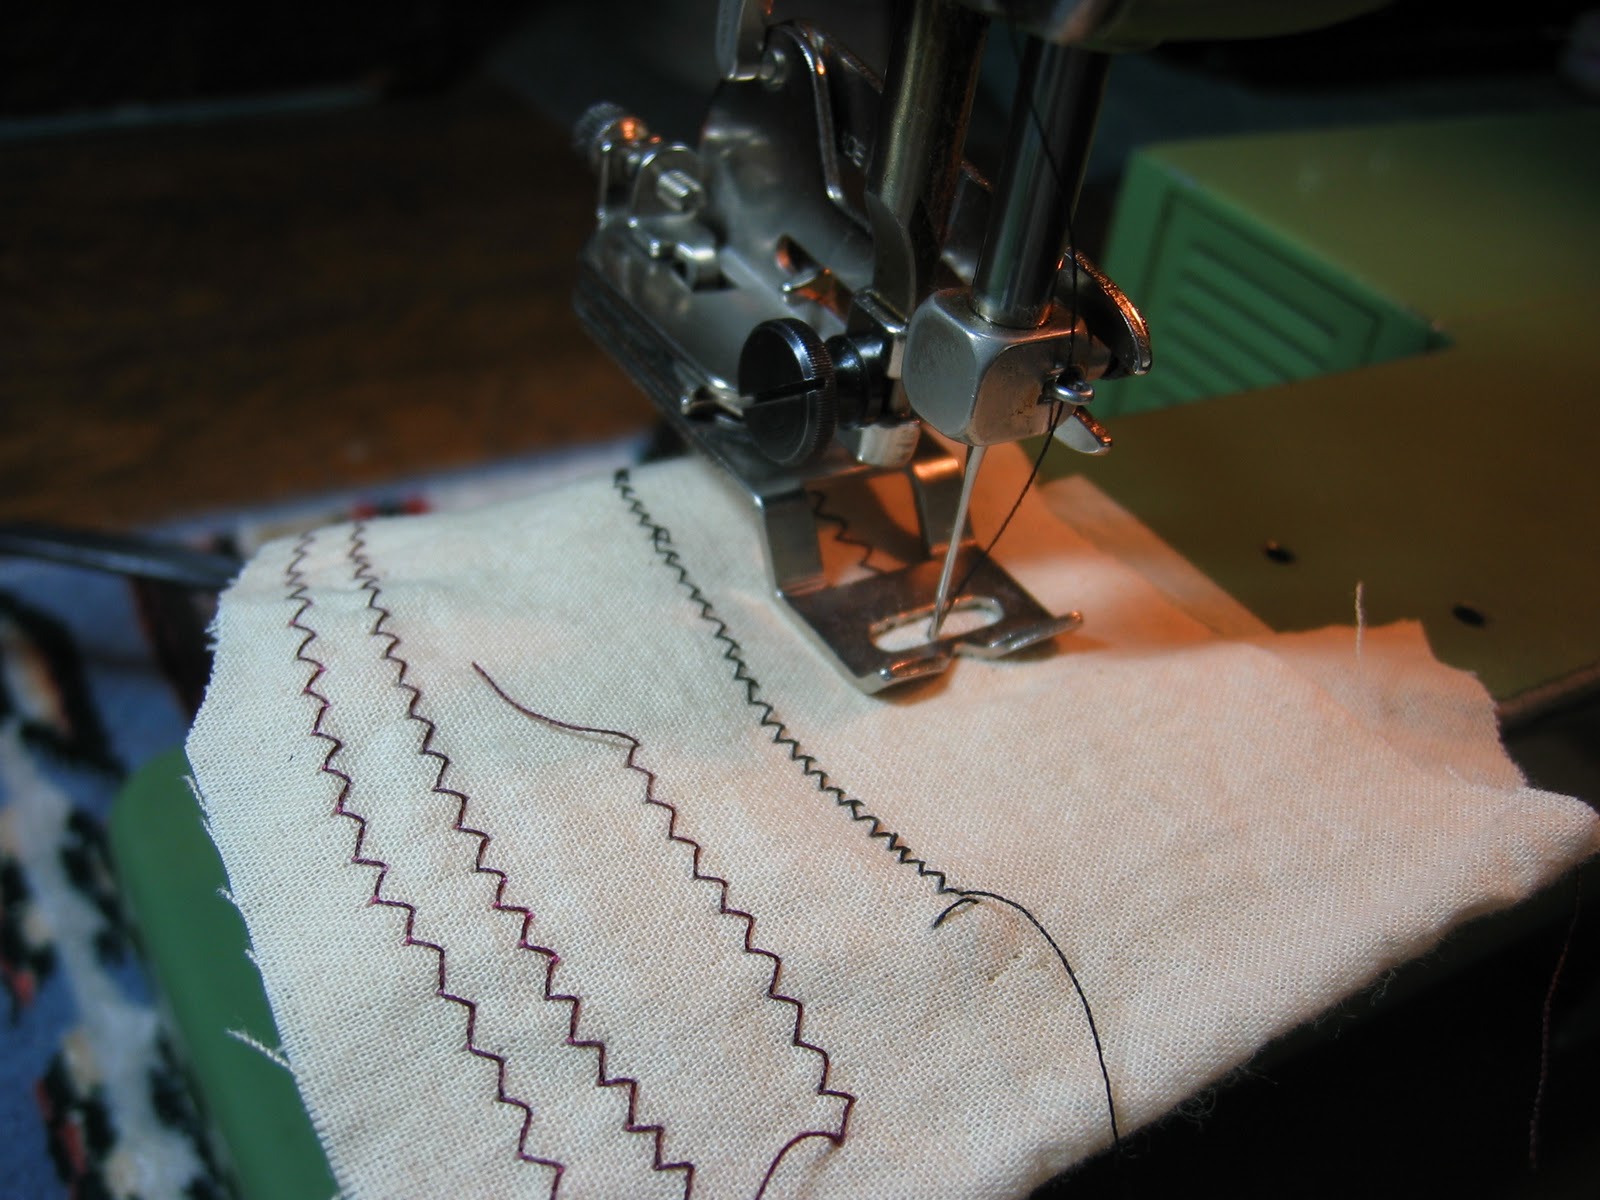 Sew Old - Sew New: What is this Odd Little Thing? A Zig Zagger